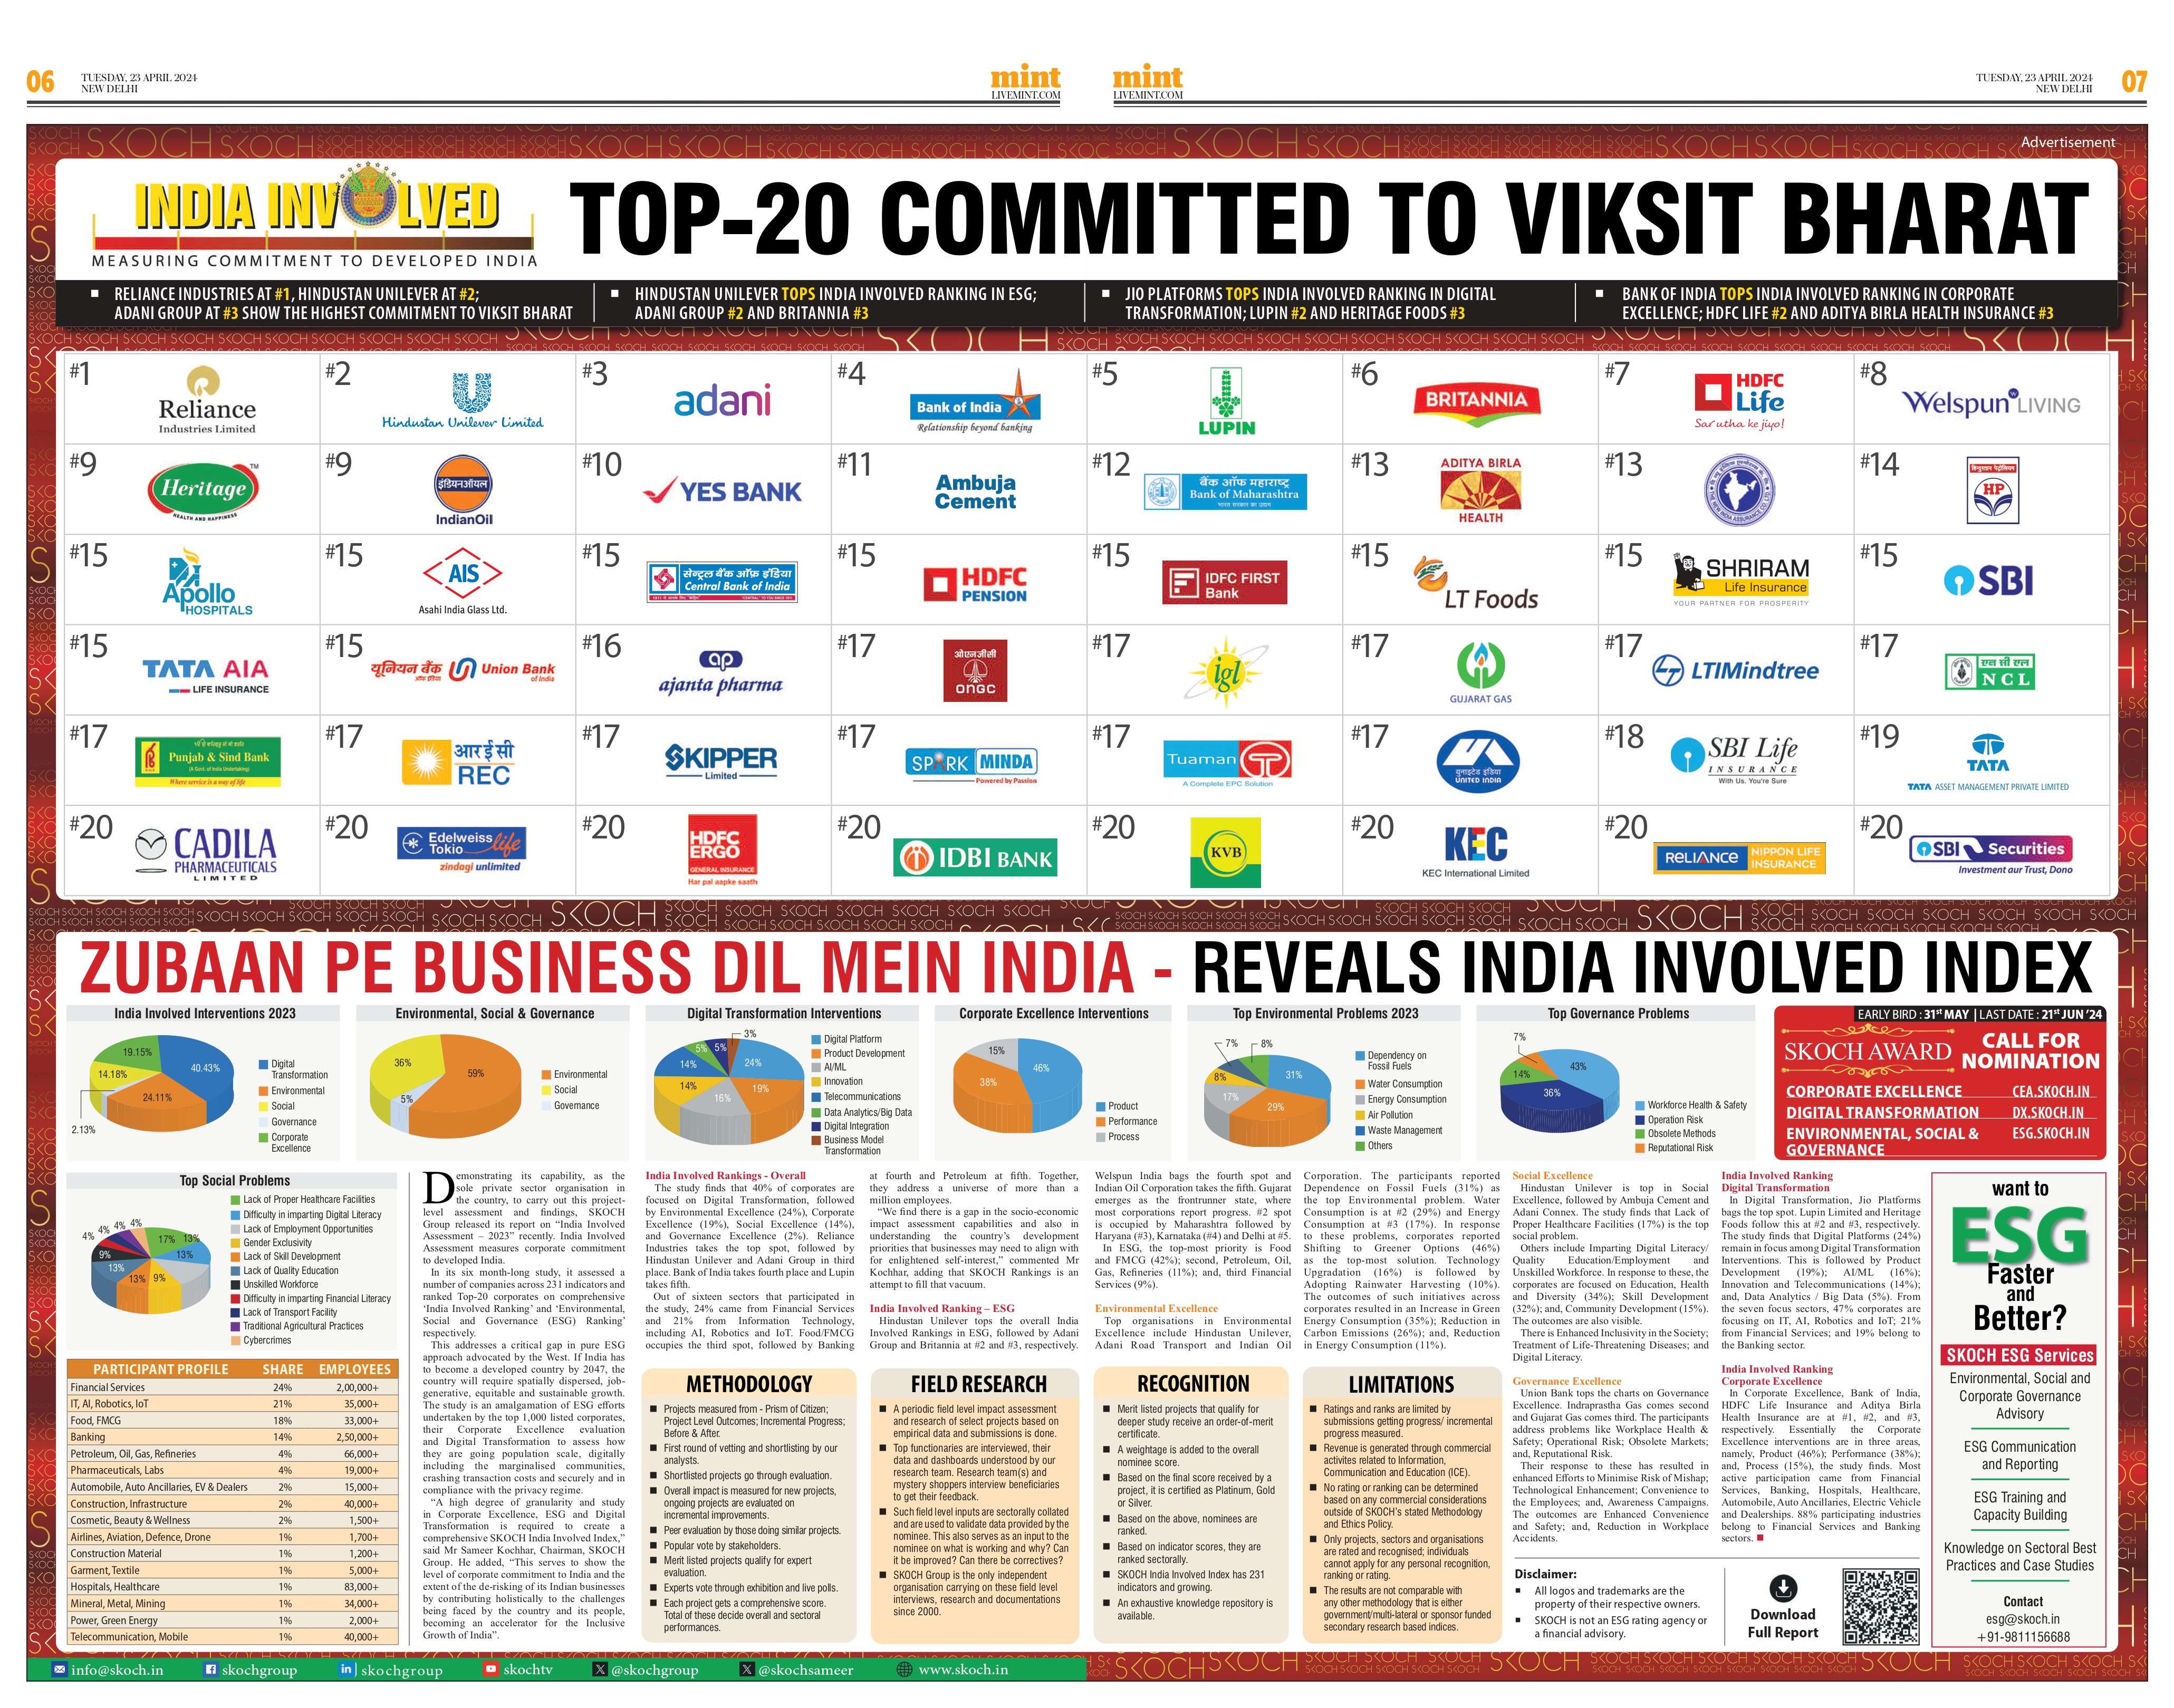 Top-20 Committed to Vikist Bharat